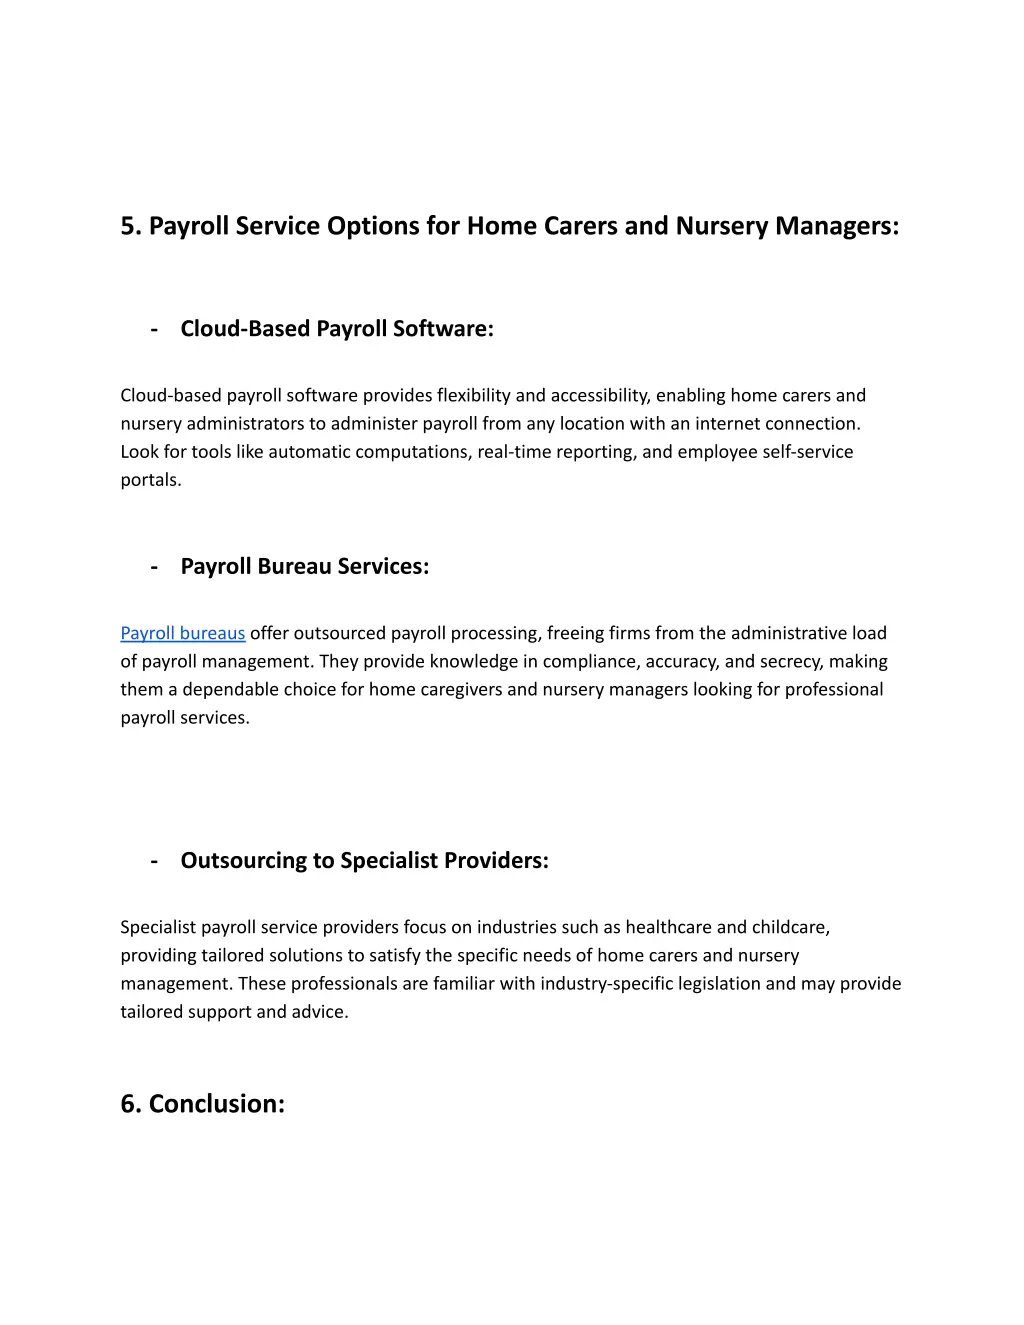 5 payroll service options for home carers